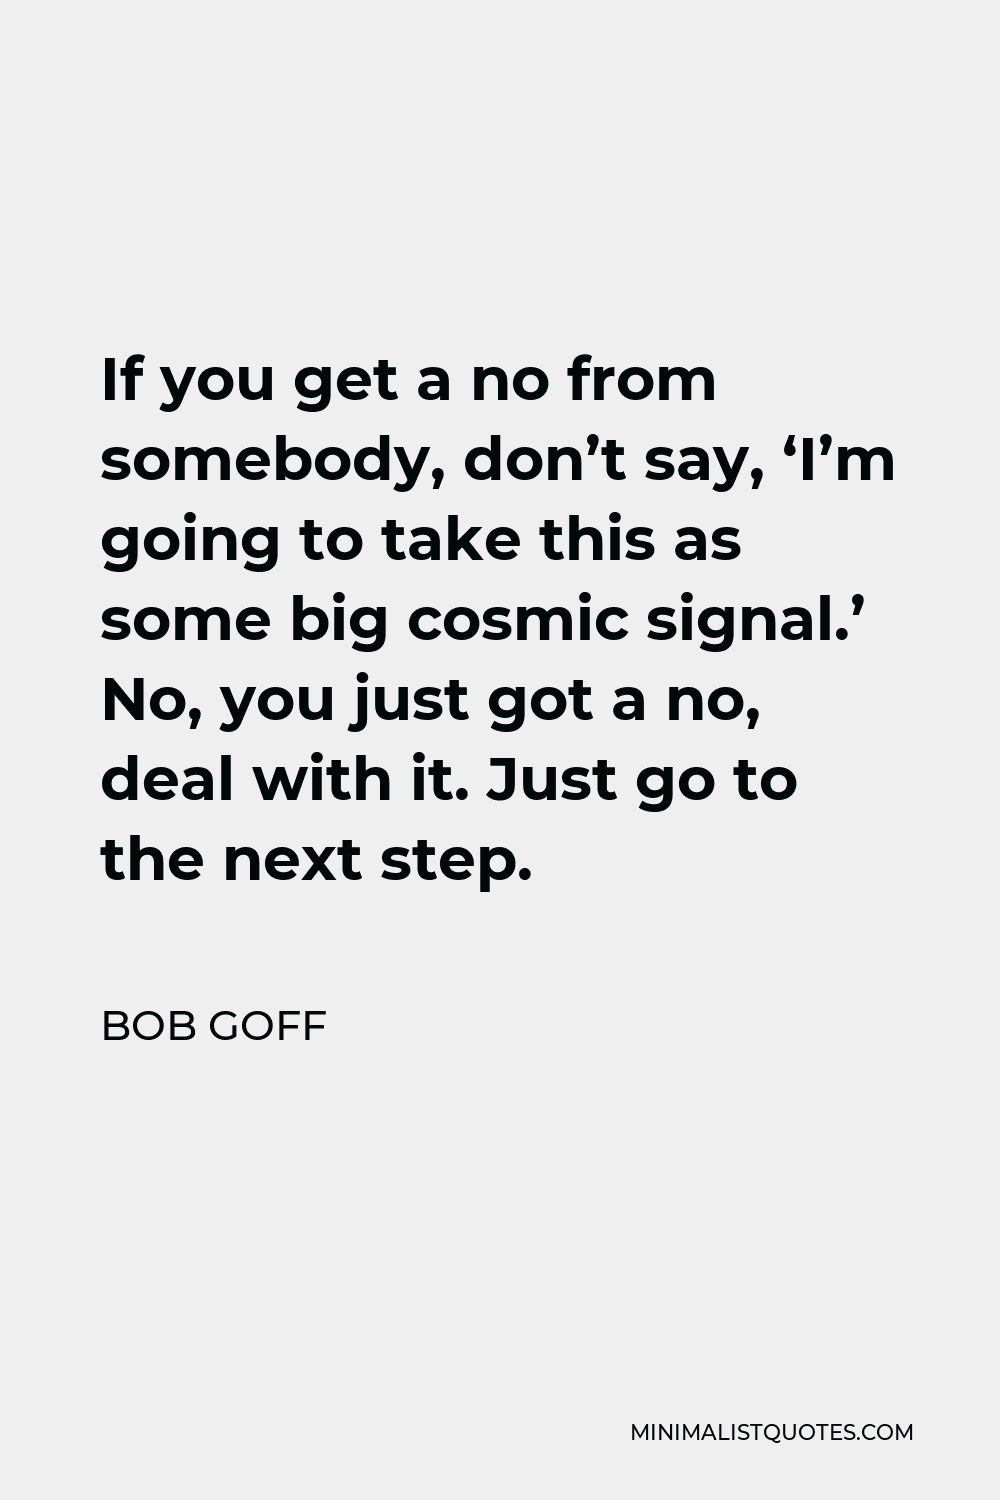 Bob Goff Quote - If you get a no from somebody, don’t say, ‘I’m going to take this as some big cosmic signal.’ No, you just got a no, deal with it. Just go to the next step.